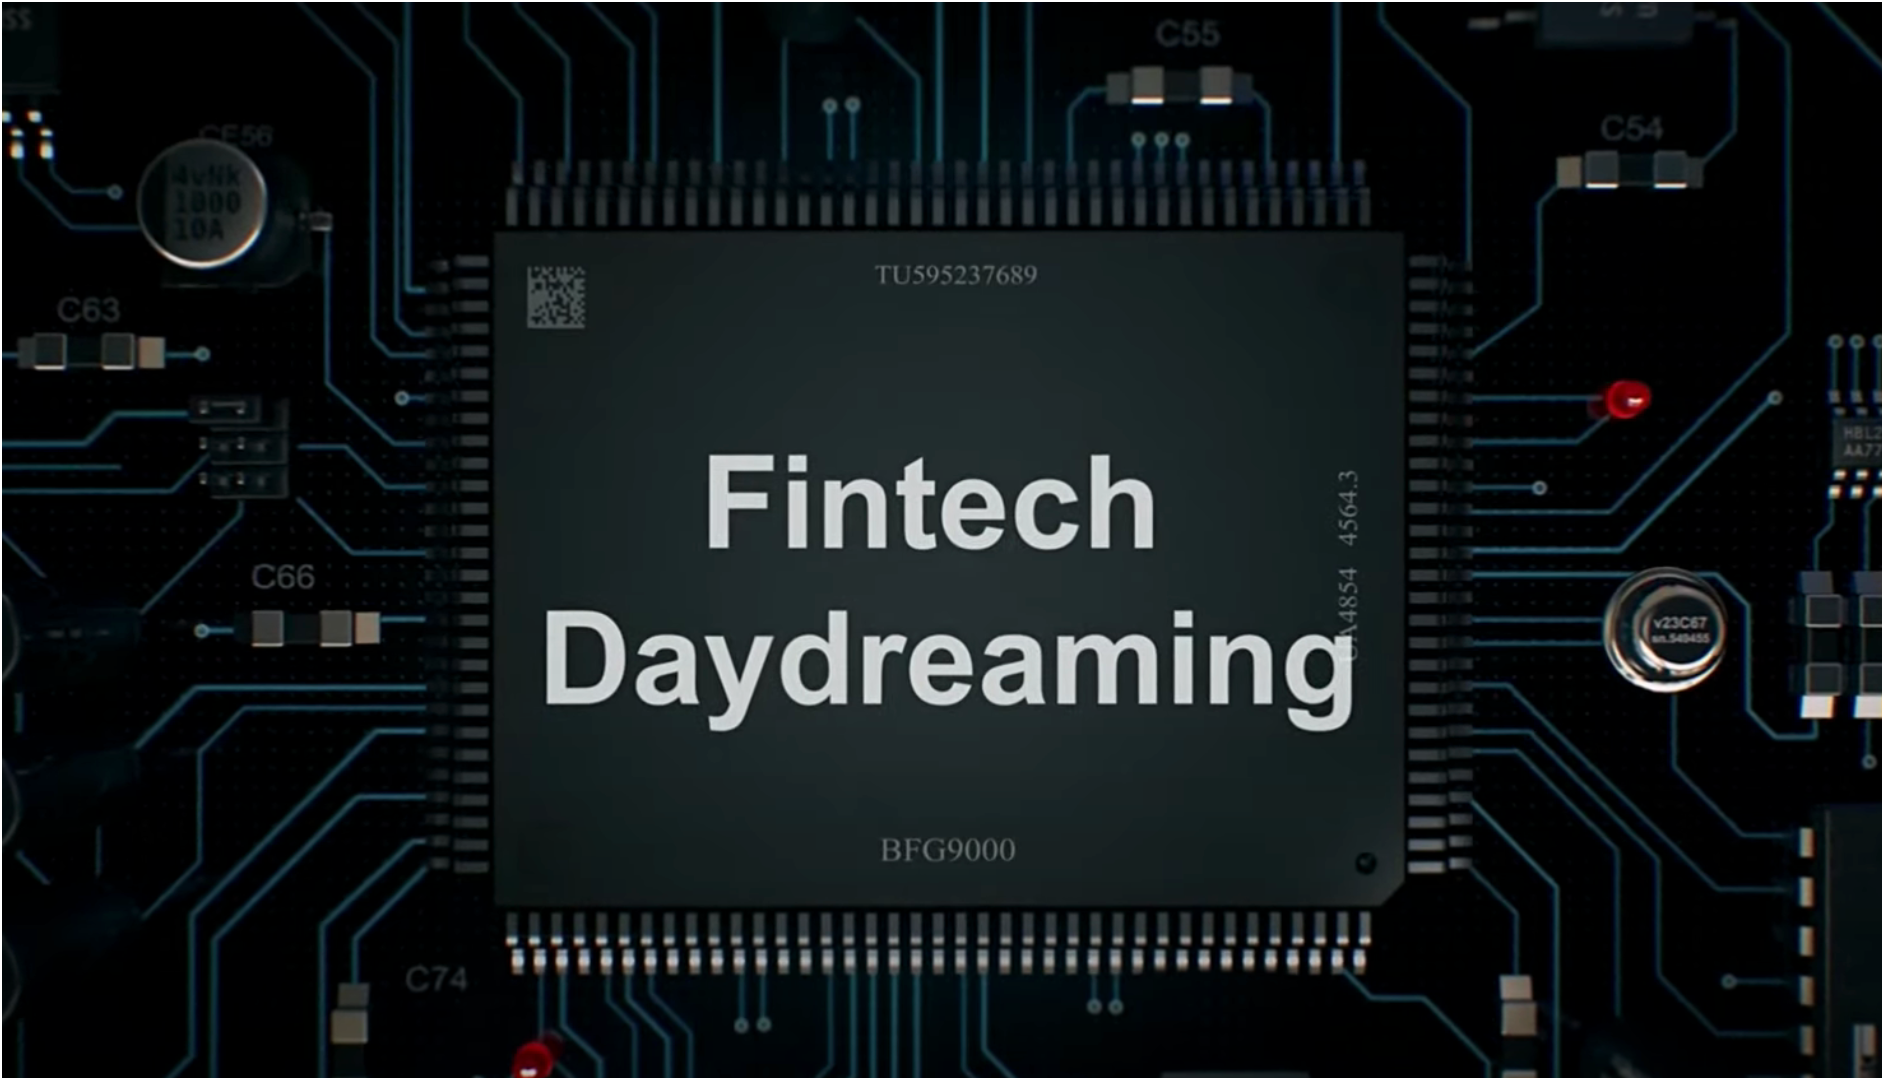 Fintech Daydreaming core banking podcast 